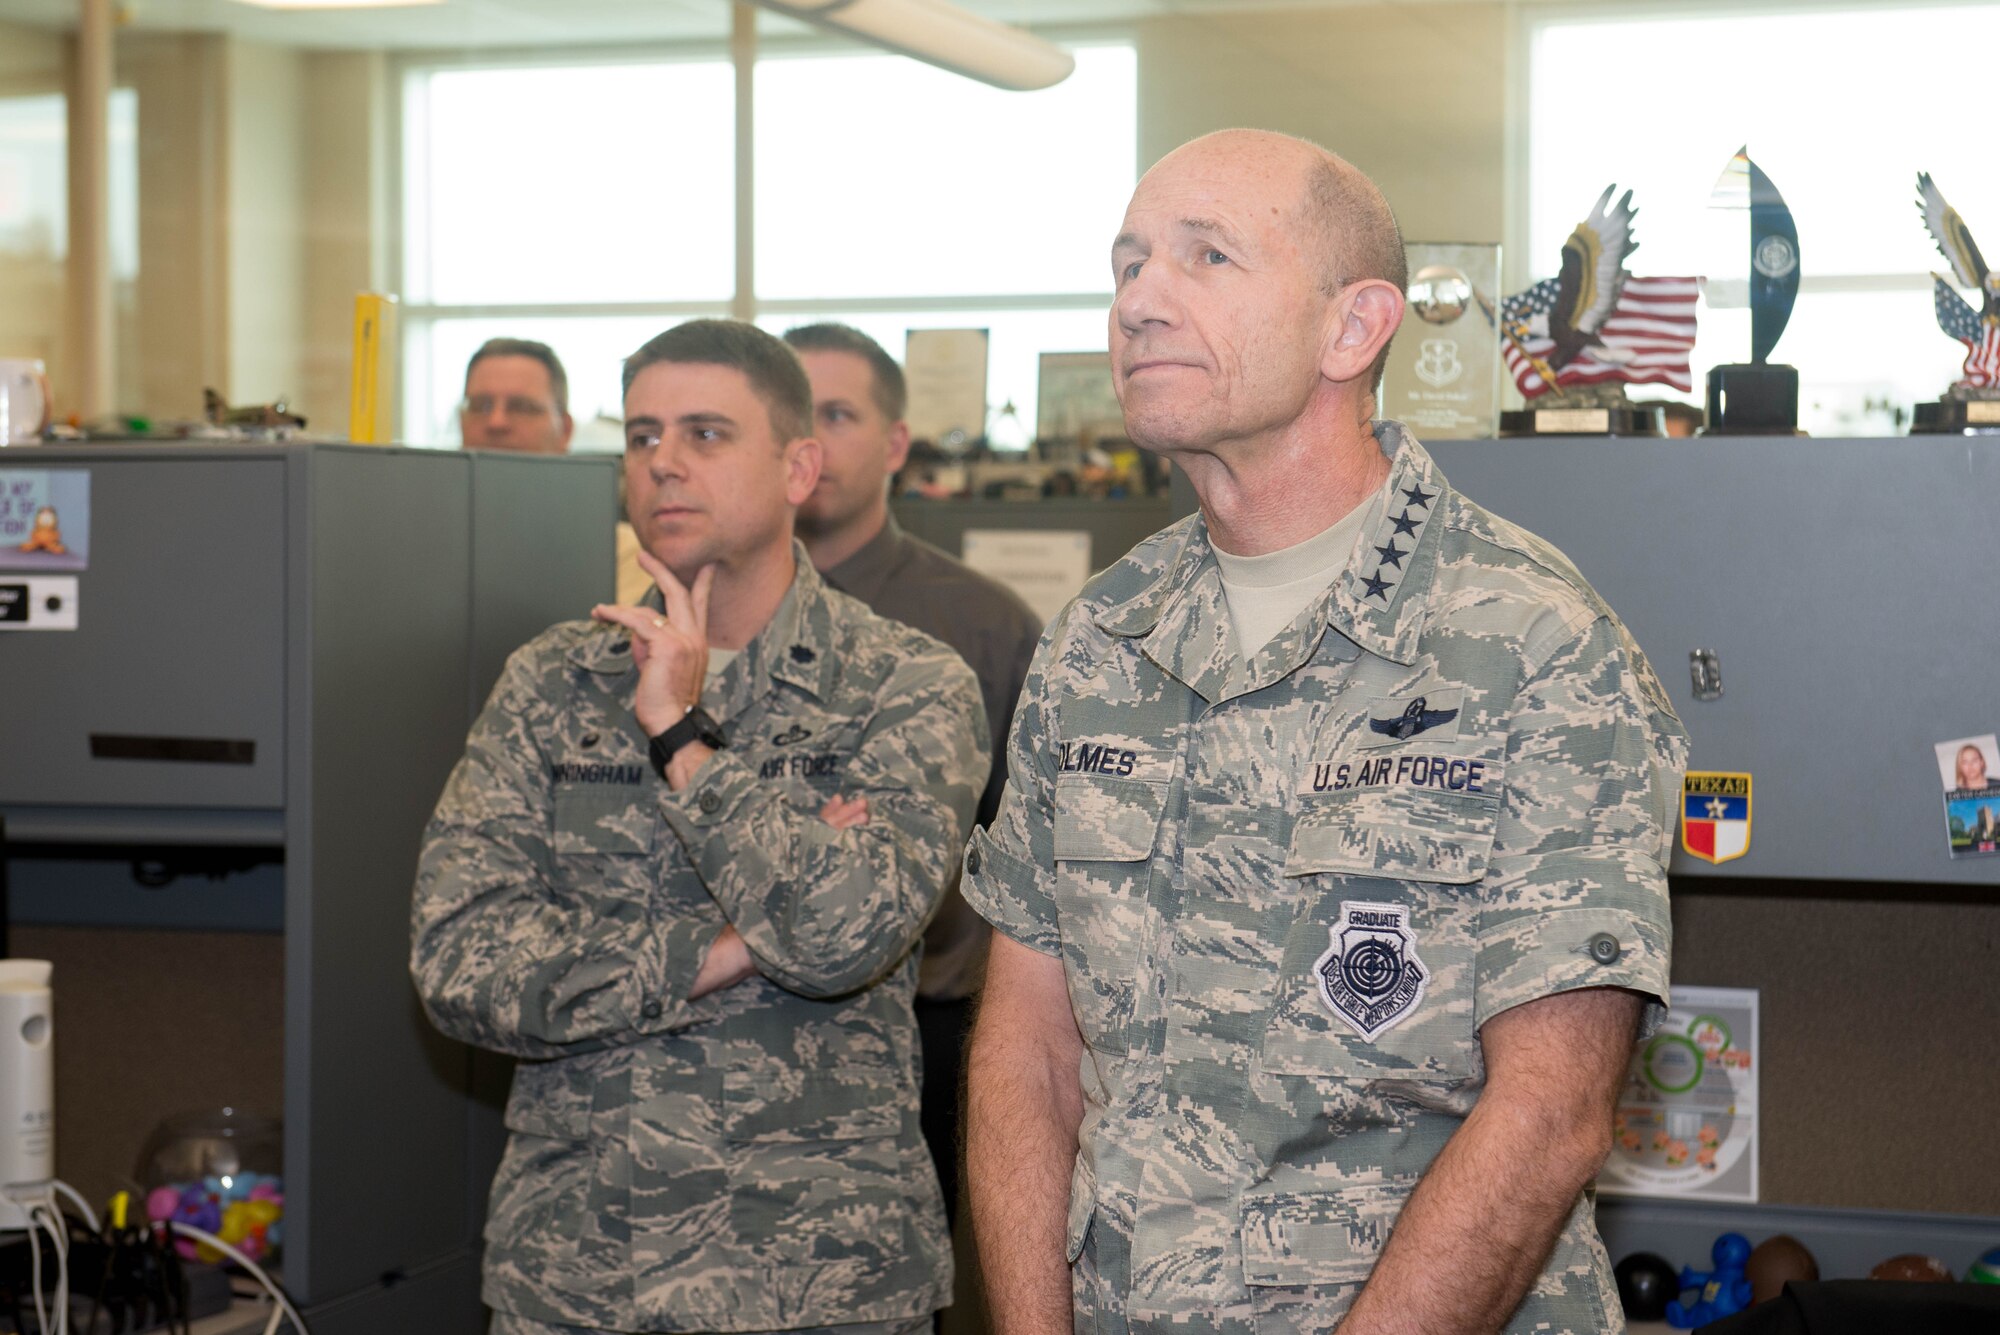 U.S. Air Force Gen. Mike Holmes, the commander of Air Combat Command, tours the 55th Weather Wing headquarters Oct. 31, 2018, at Offutt Air Force Base, Nebraska.